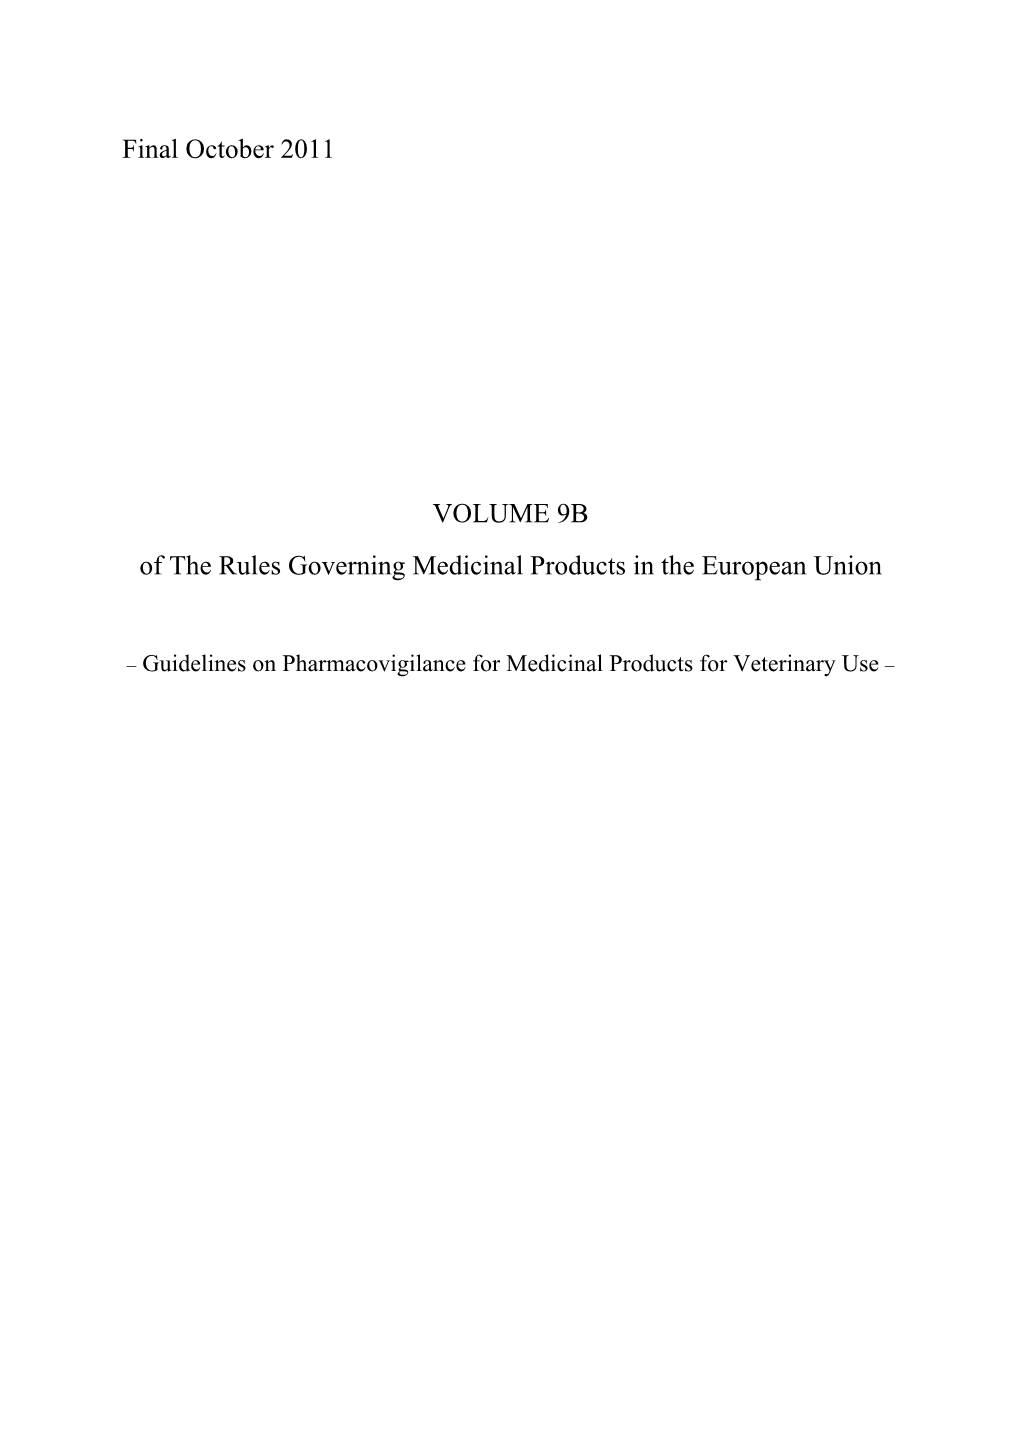 Guidelines on Pharmacovigilance for Medicinal Products for Veterinary Use –